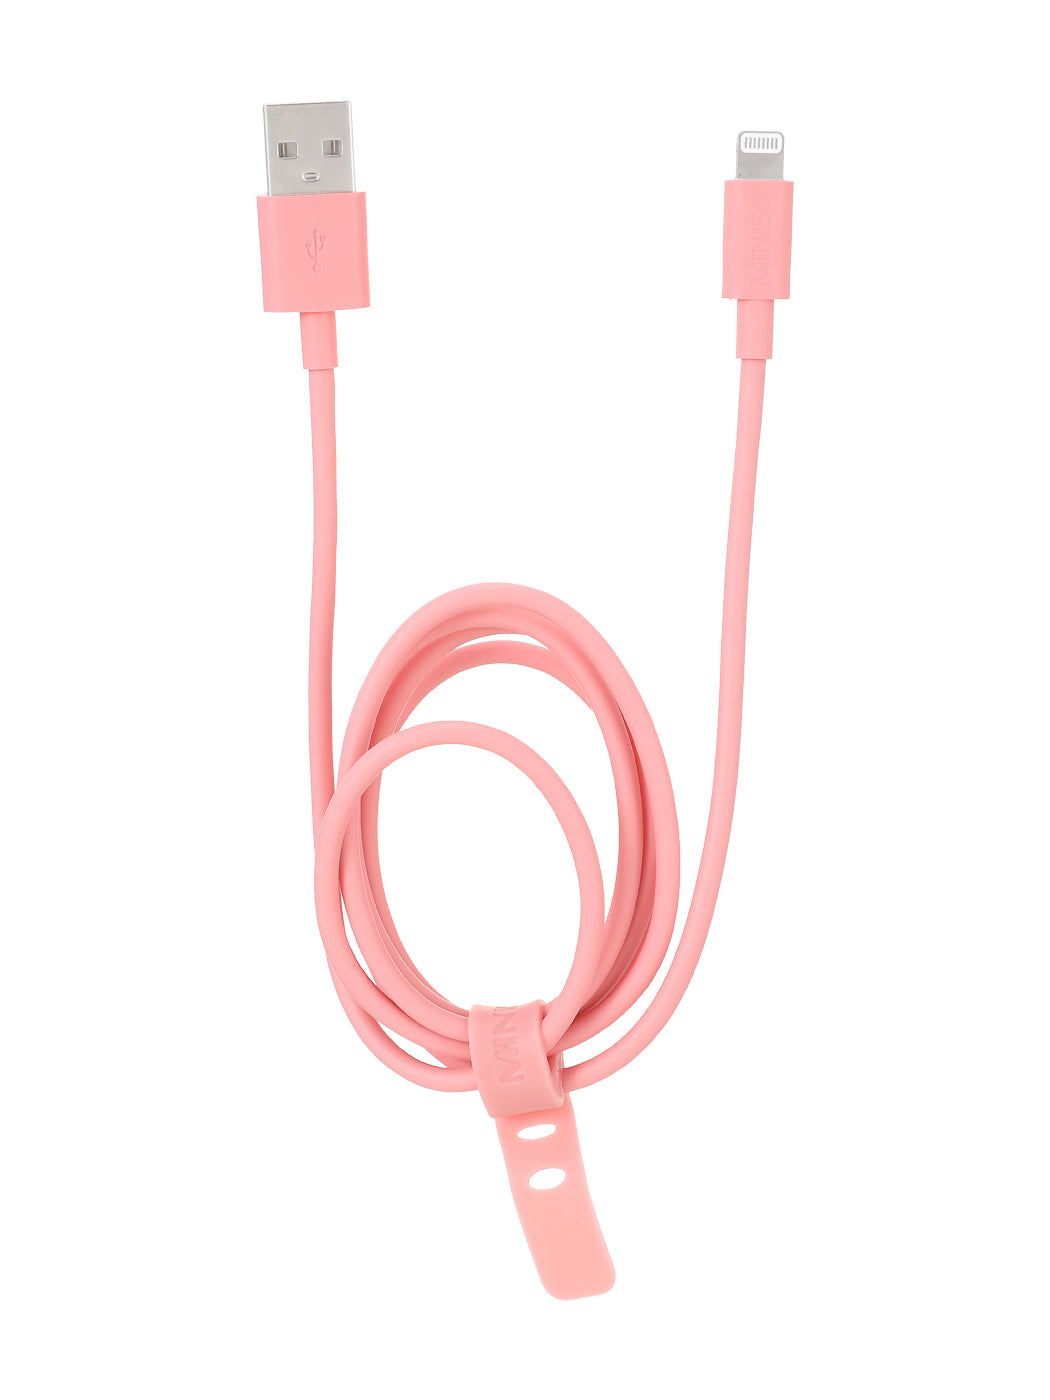 MINISO 1M FAST CHARGE CHARGE & SYNC CABLE WITH LIGHTNING CONNECTOR (PINK) 2010251514100 CHARGING CABLE WITH LIGHTNING CONNECTOR